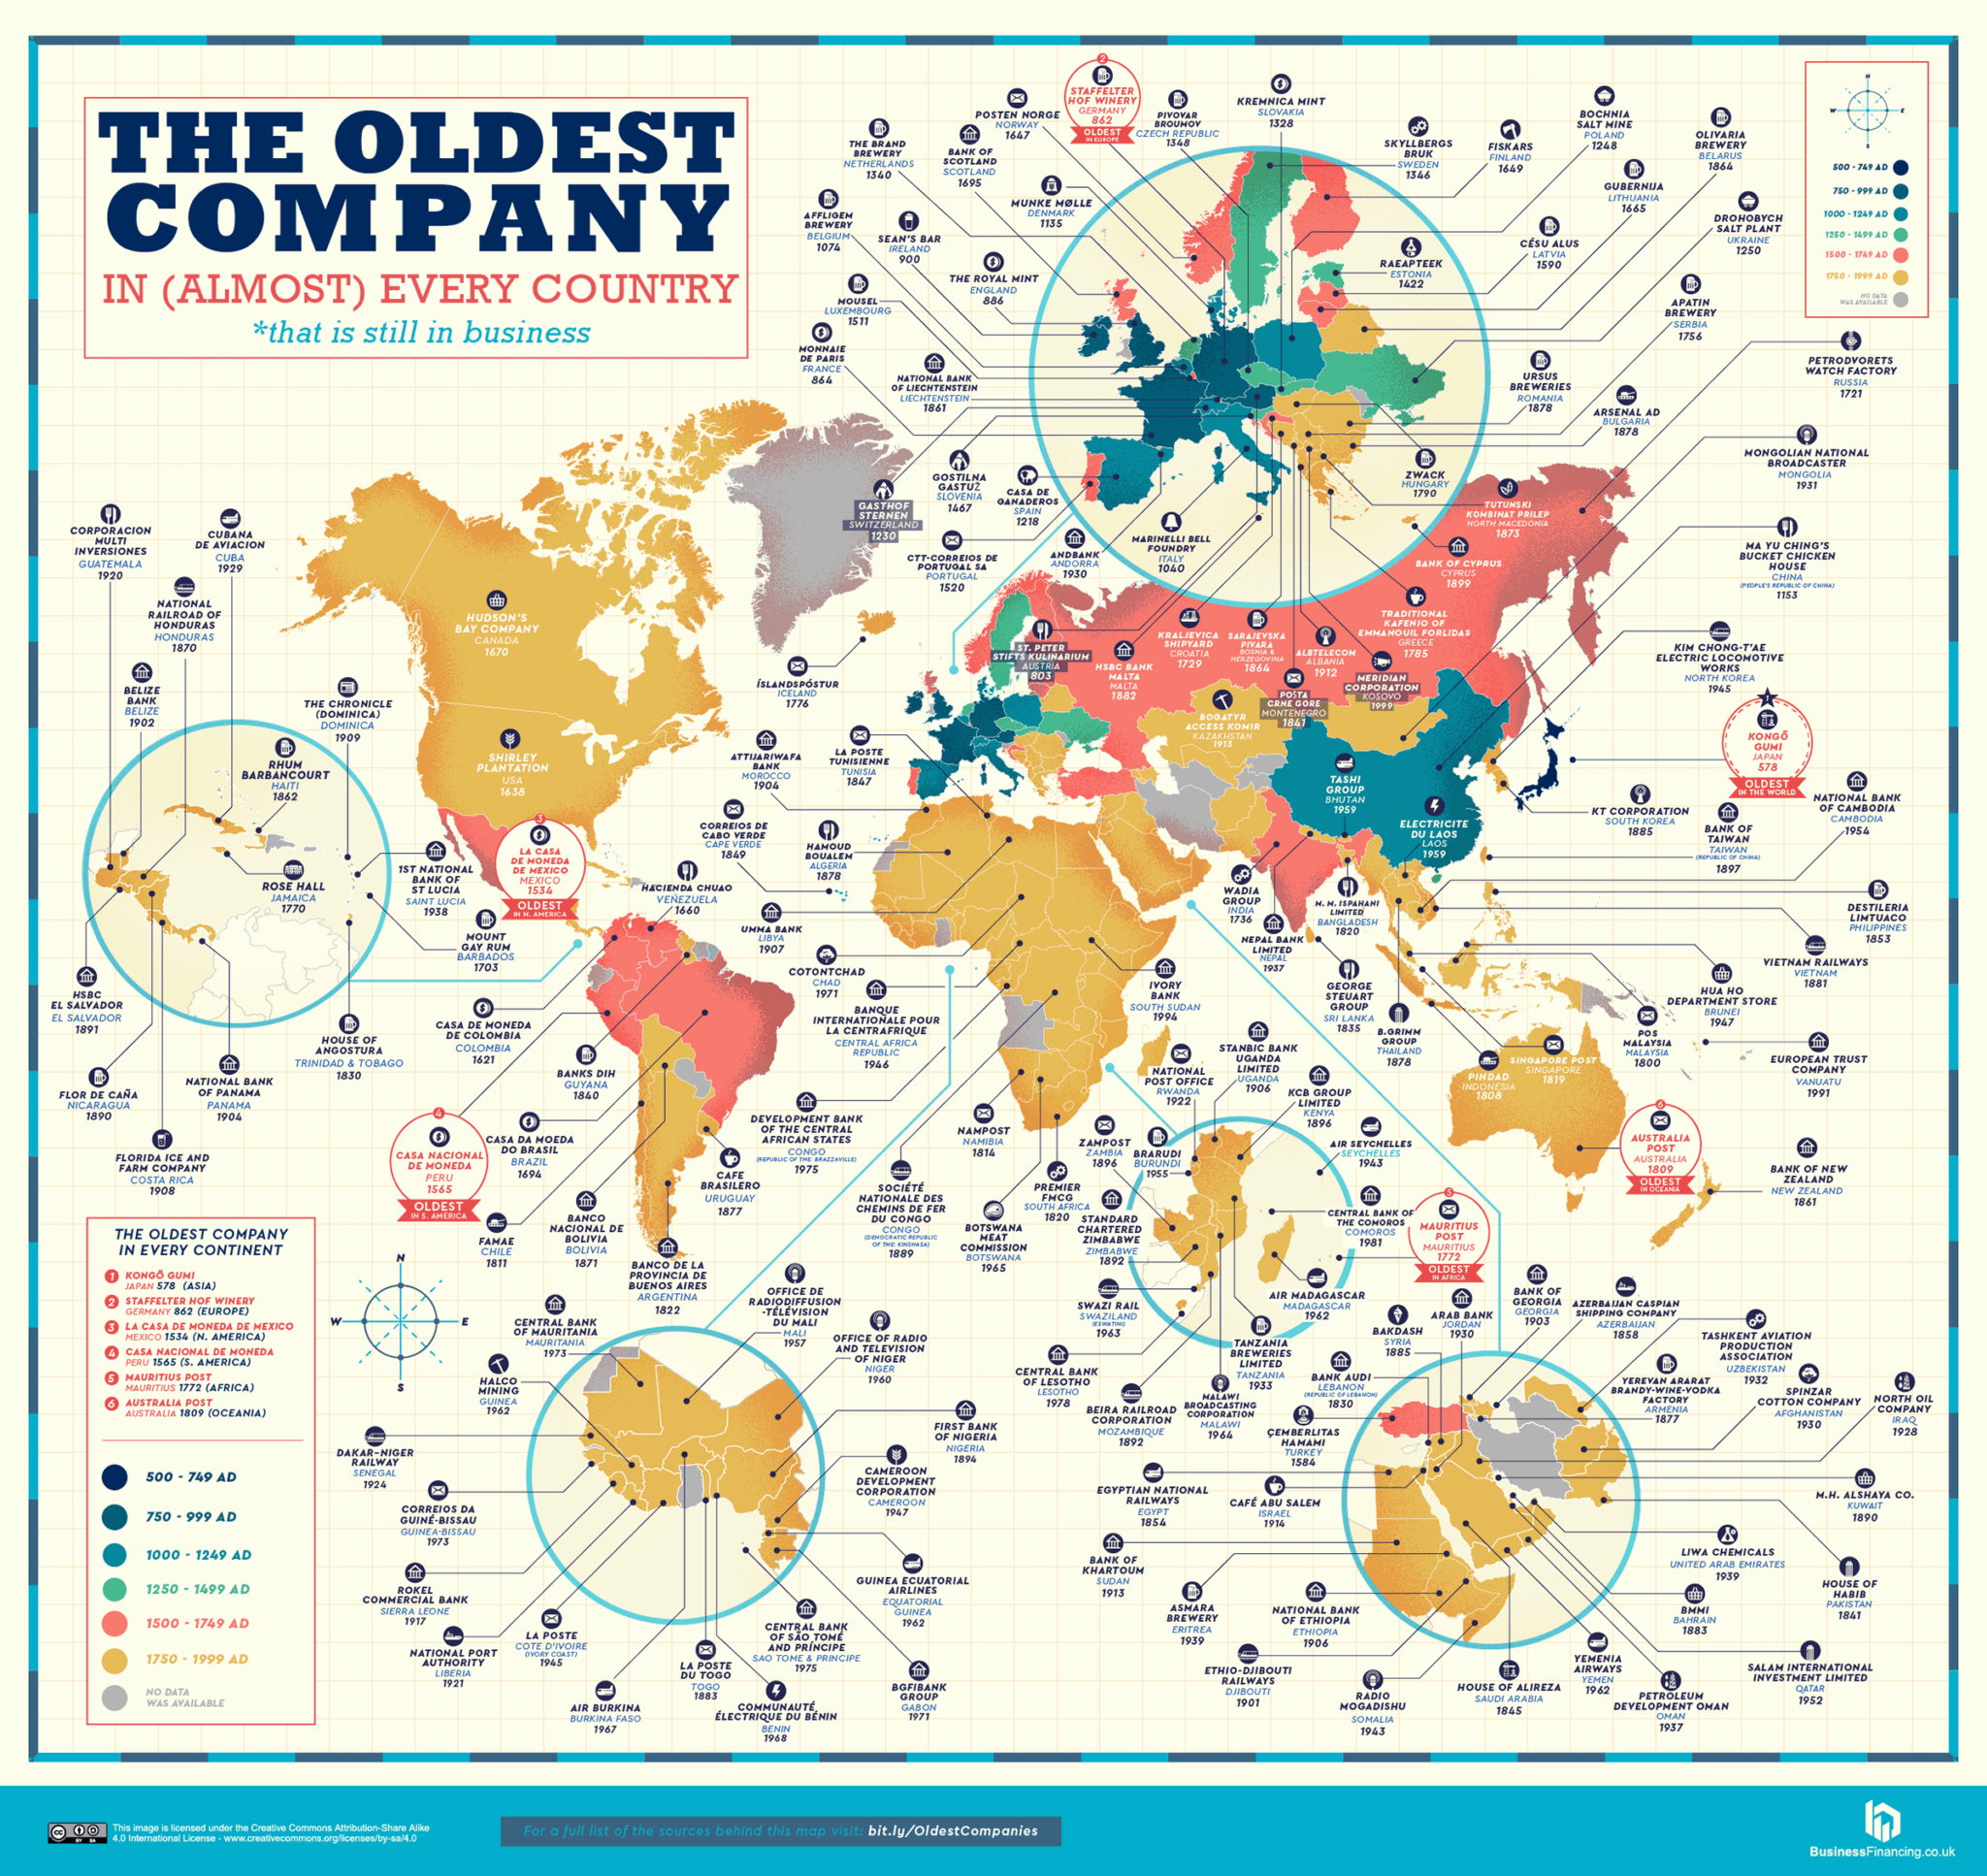 Map_The-Oldest-Company-in-Every-Country_World-2048x1934